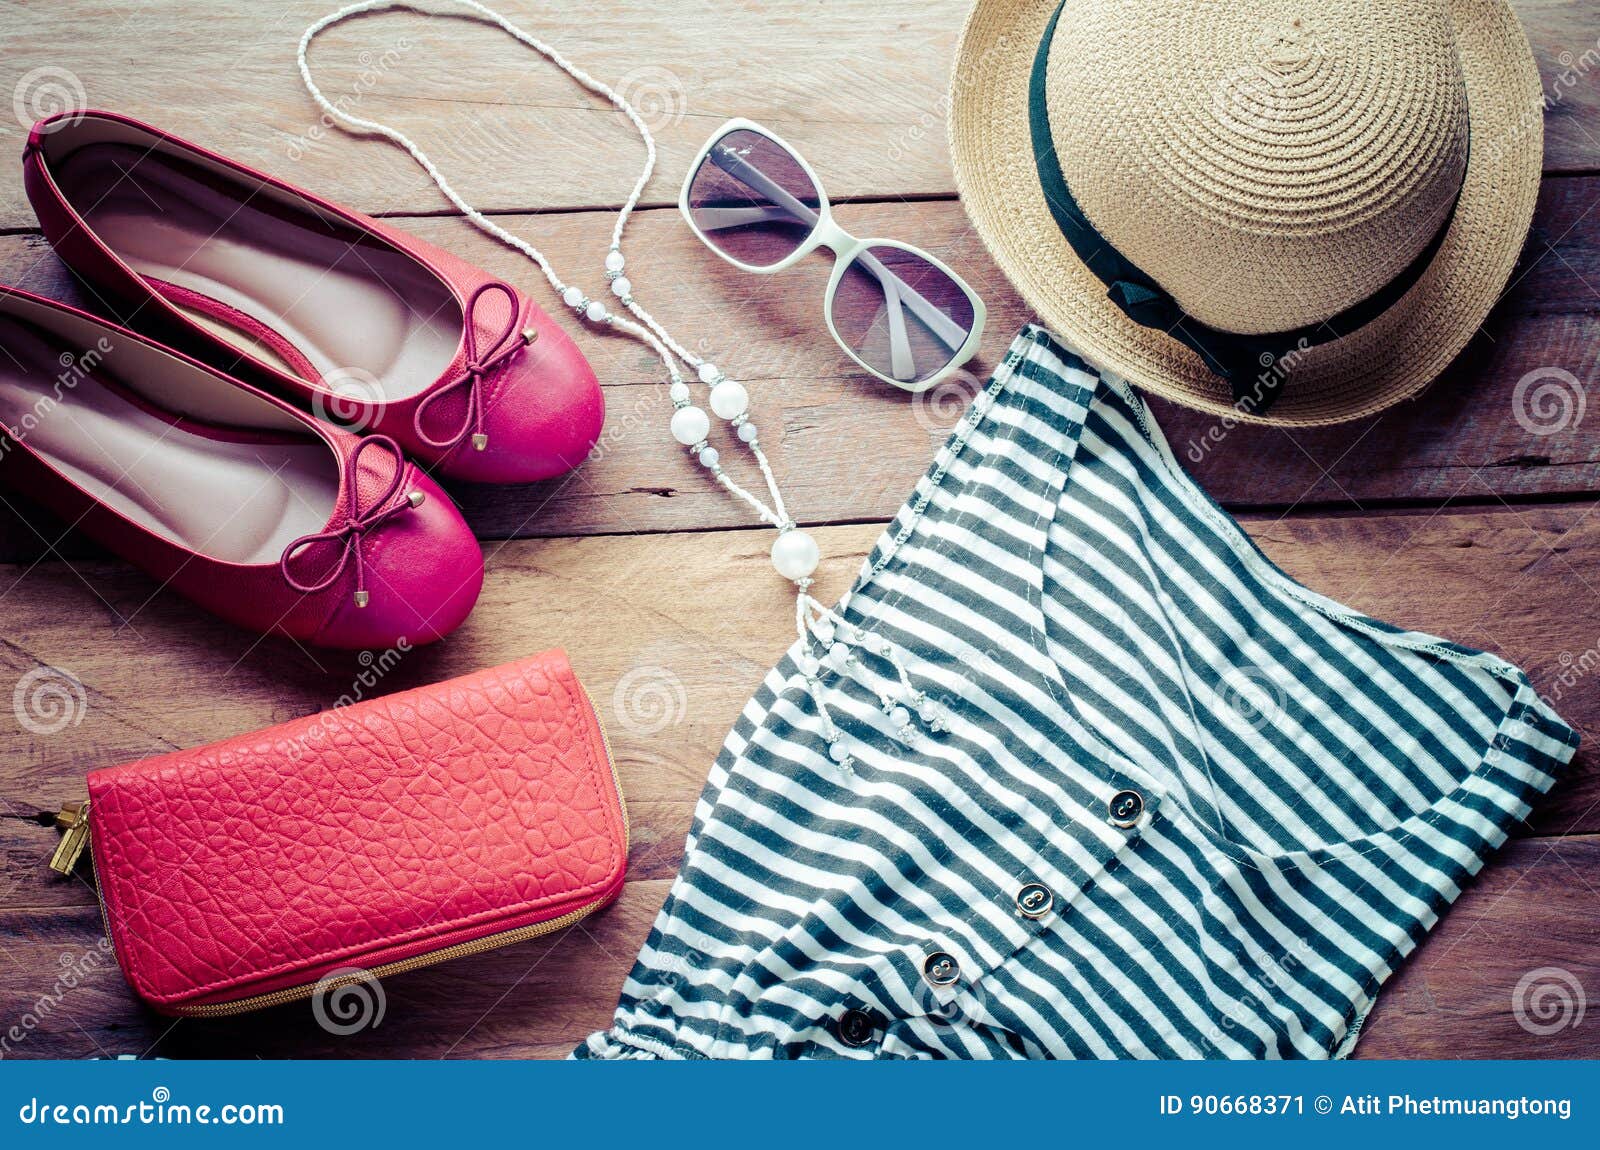 Clothing for Women, Placed on a Wooden Floor Stock Image - Image of ...